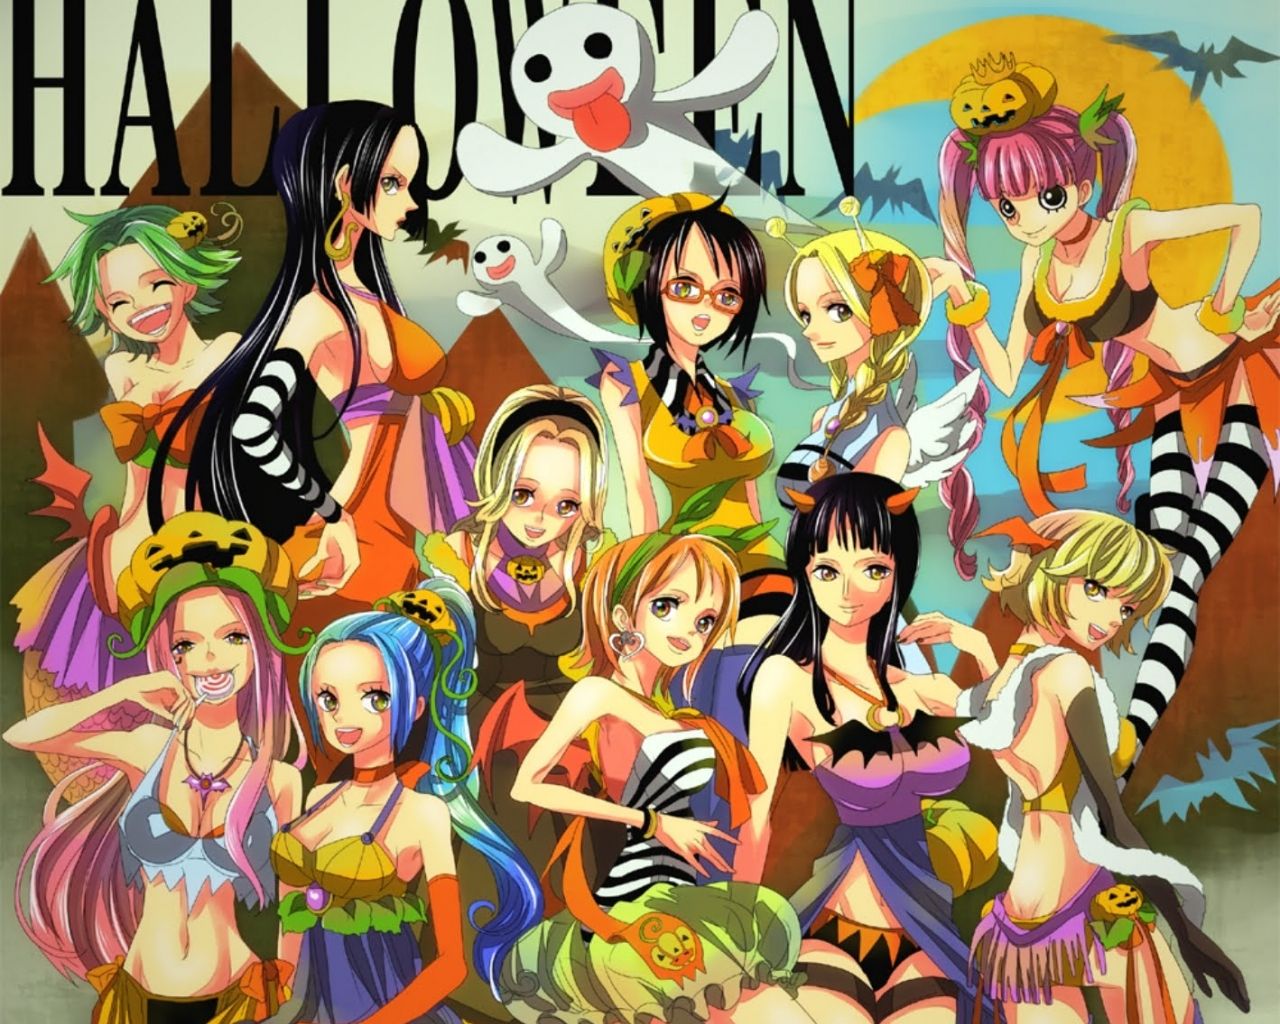 Free download One Piece Wallpaper In One Piece Anime wallpaper img onepiece 237 [1418x1200] for your Desktop, Mobile & Tablet. Explore One Piece Manga Wallpaper. One Piece Manga Wallpaper